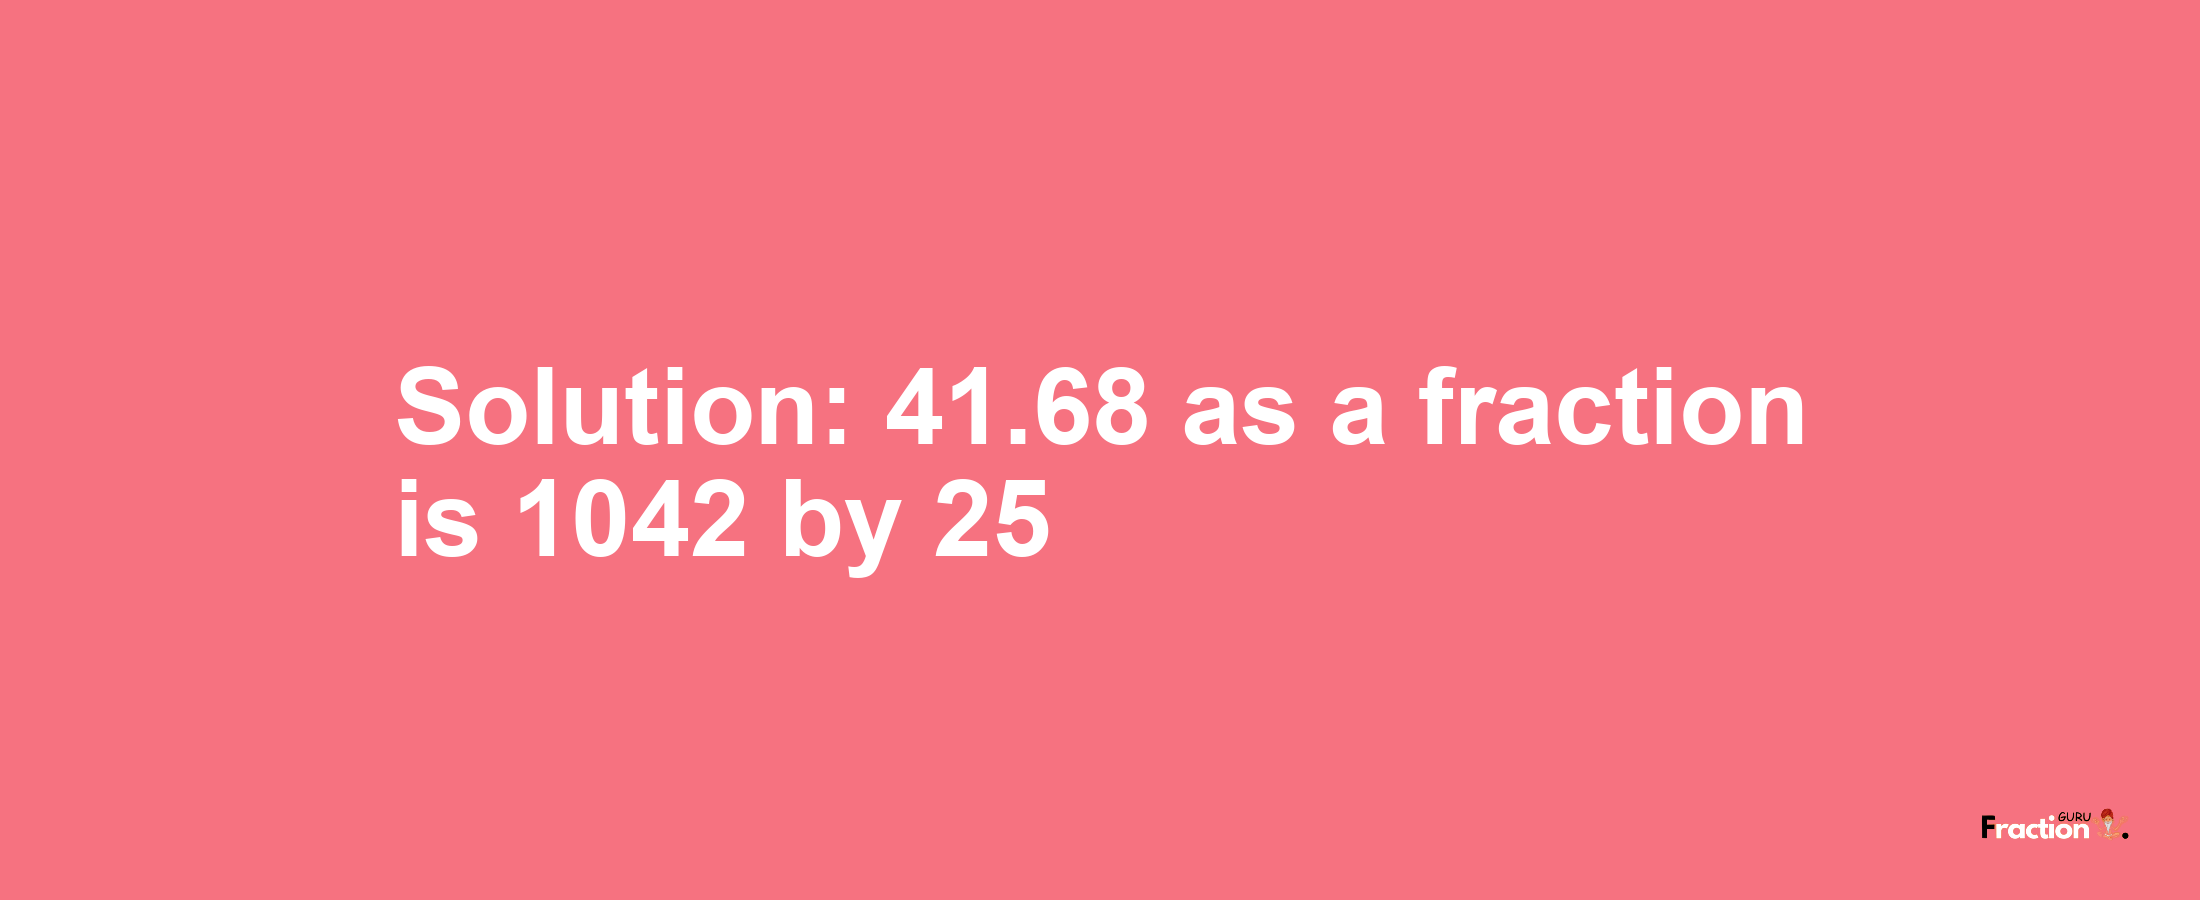 Solution:41.68 as a fraction is 1042/25